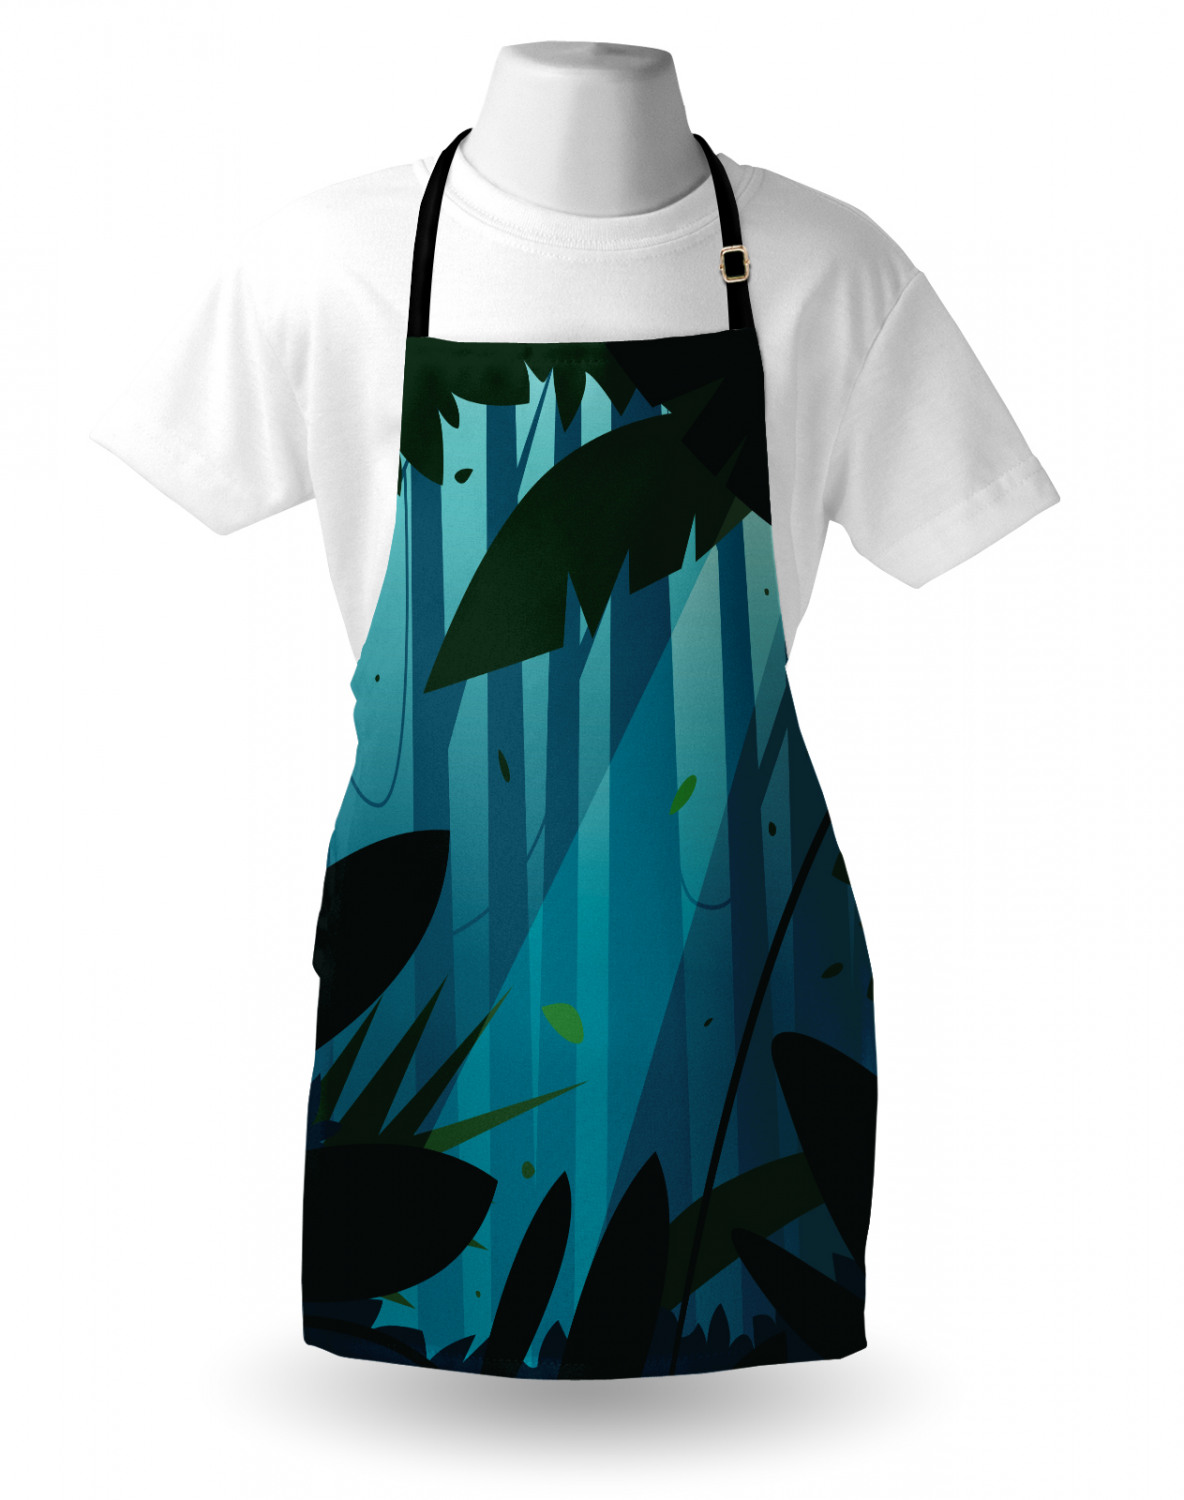 Details about  / Ambesonne Apron Bib with Adjustable Neck for Gardening Cooking Clear Image